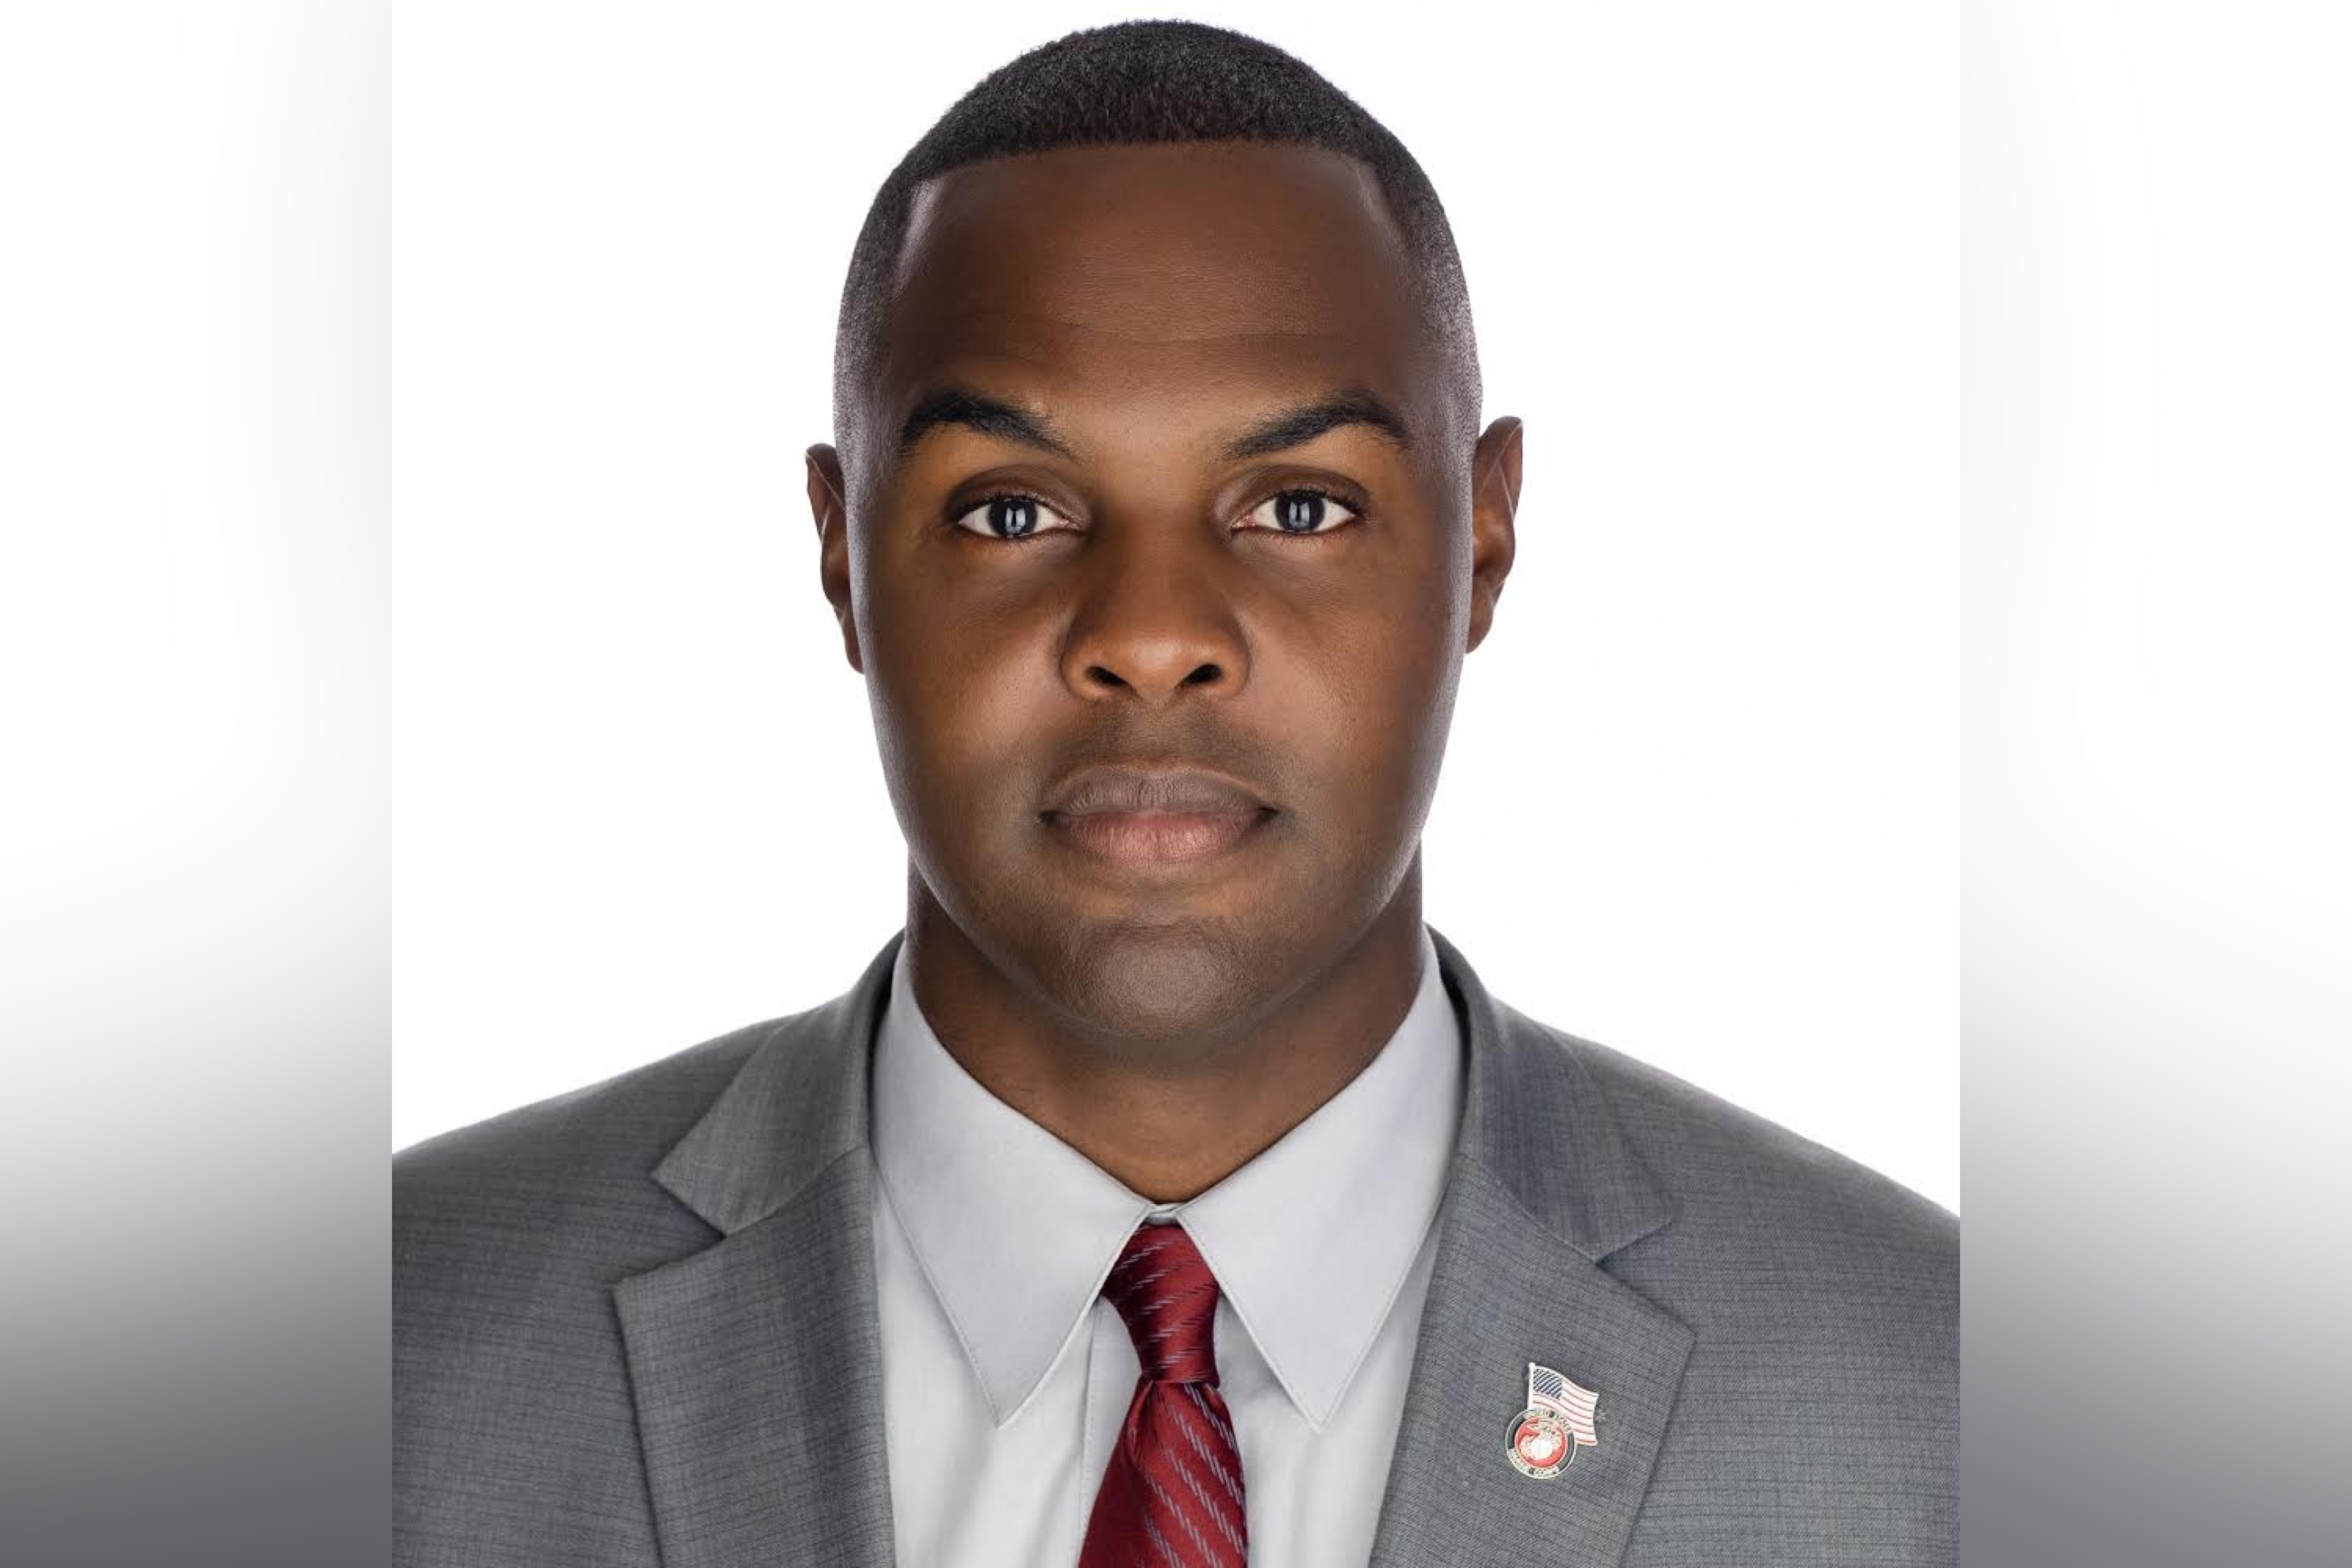 U.S. Marine Wins $20K in 'Pitch:HBCU' Competition to Take His Startup to the Next Level